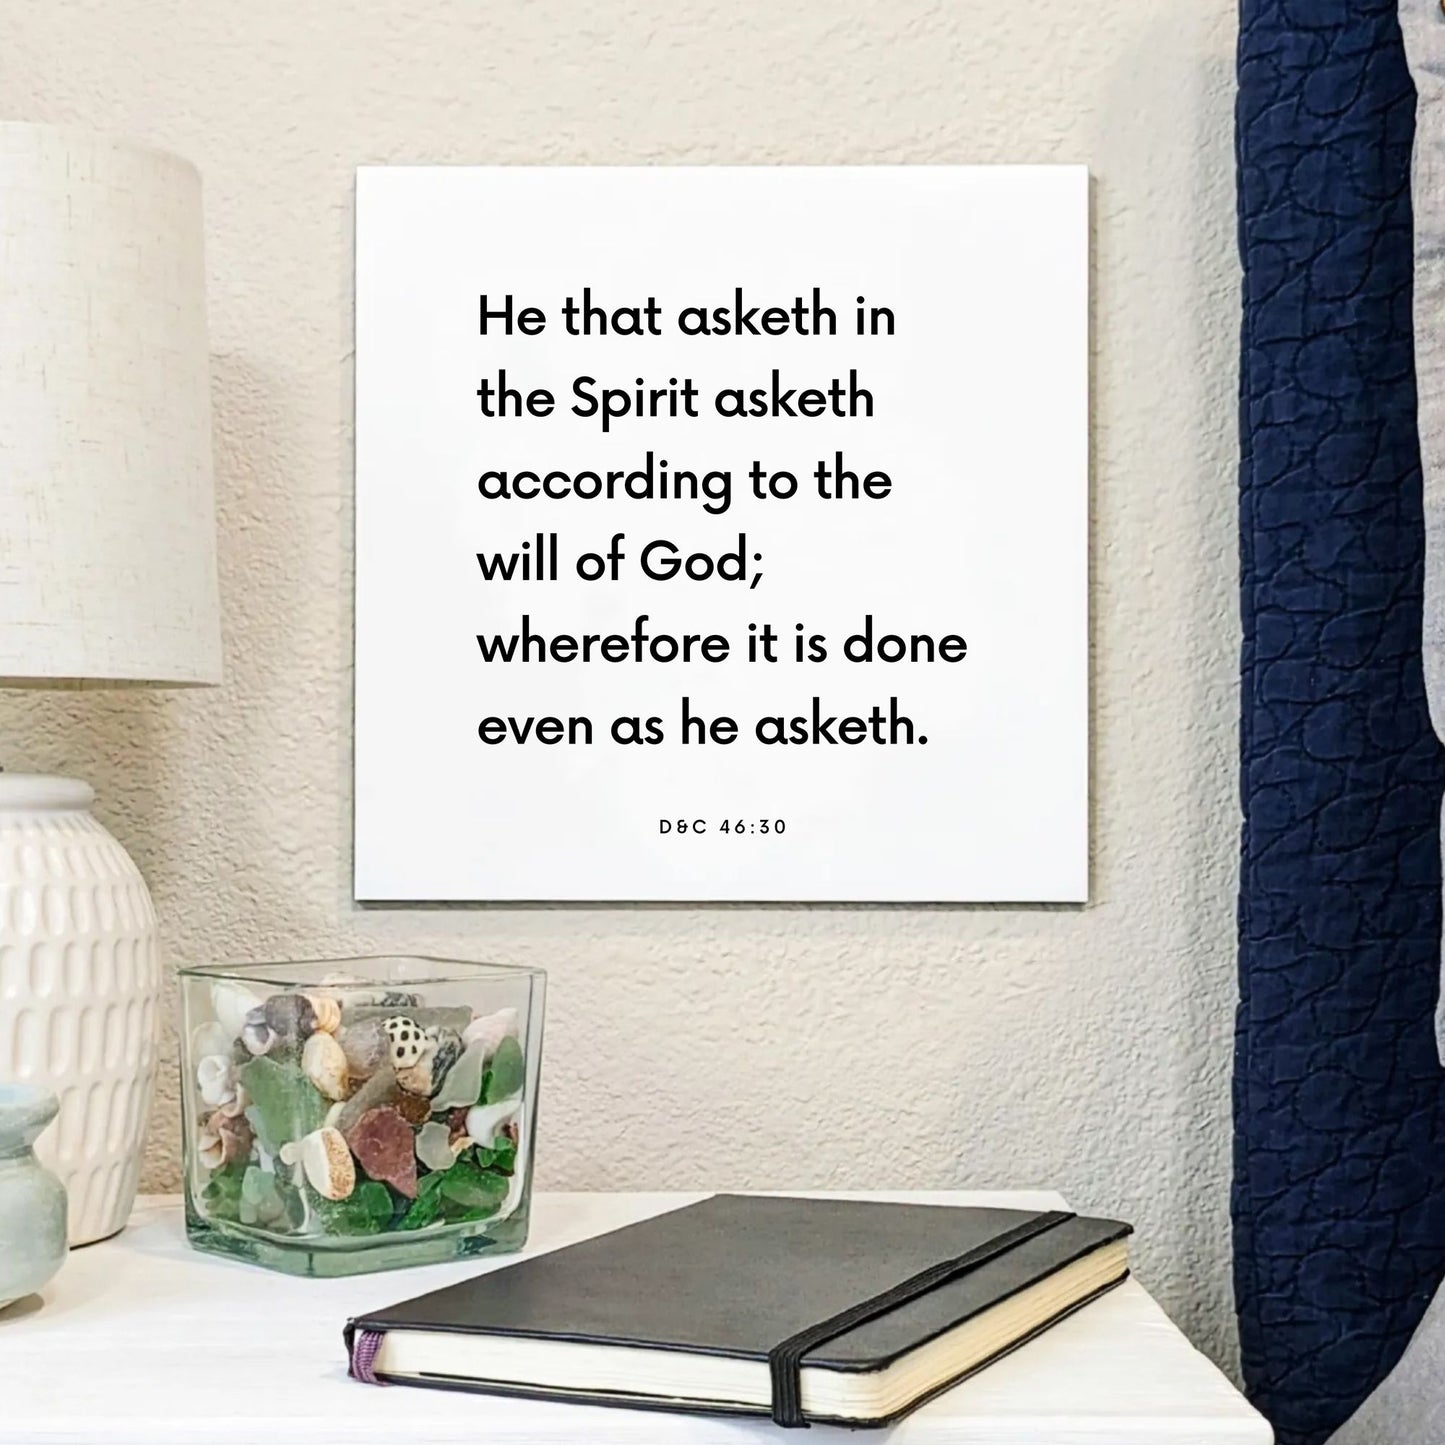 Bedside mouting of the scripture tile for D&C 46:30 - "He that asketh in the Spirit"